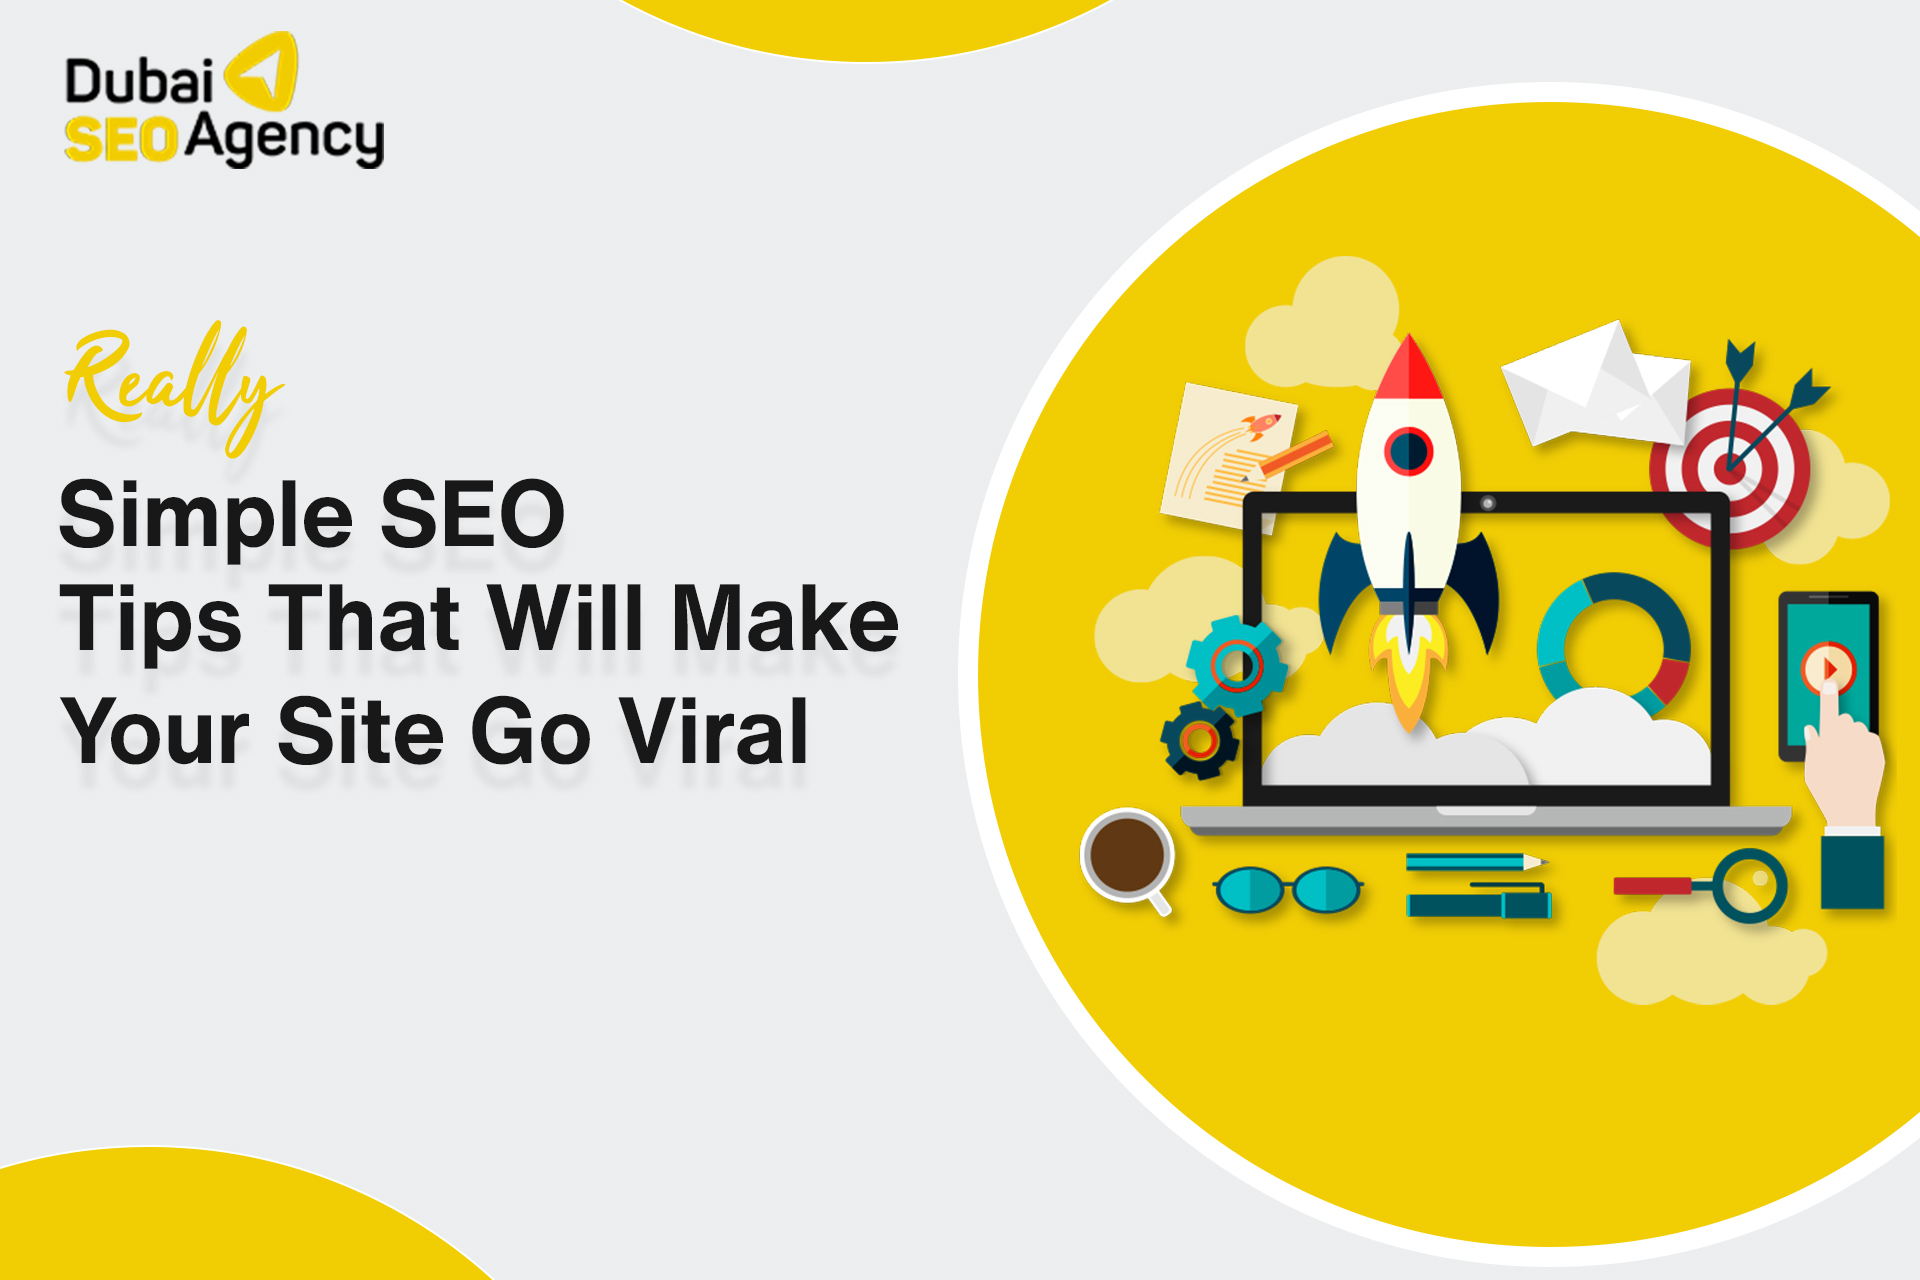 Really Simple SEO Tips That Will Make Your Site Go Viral